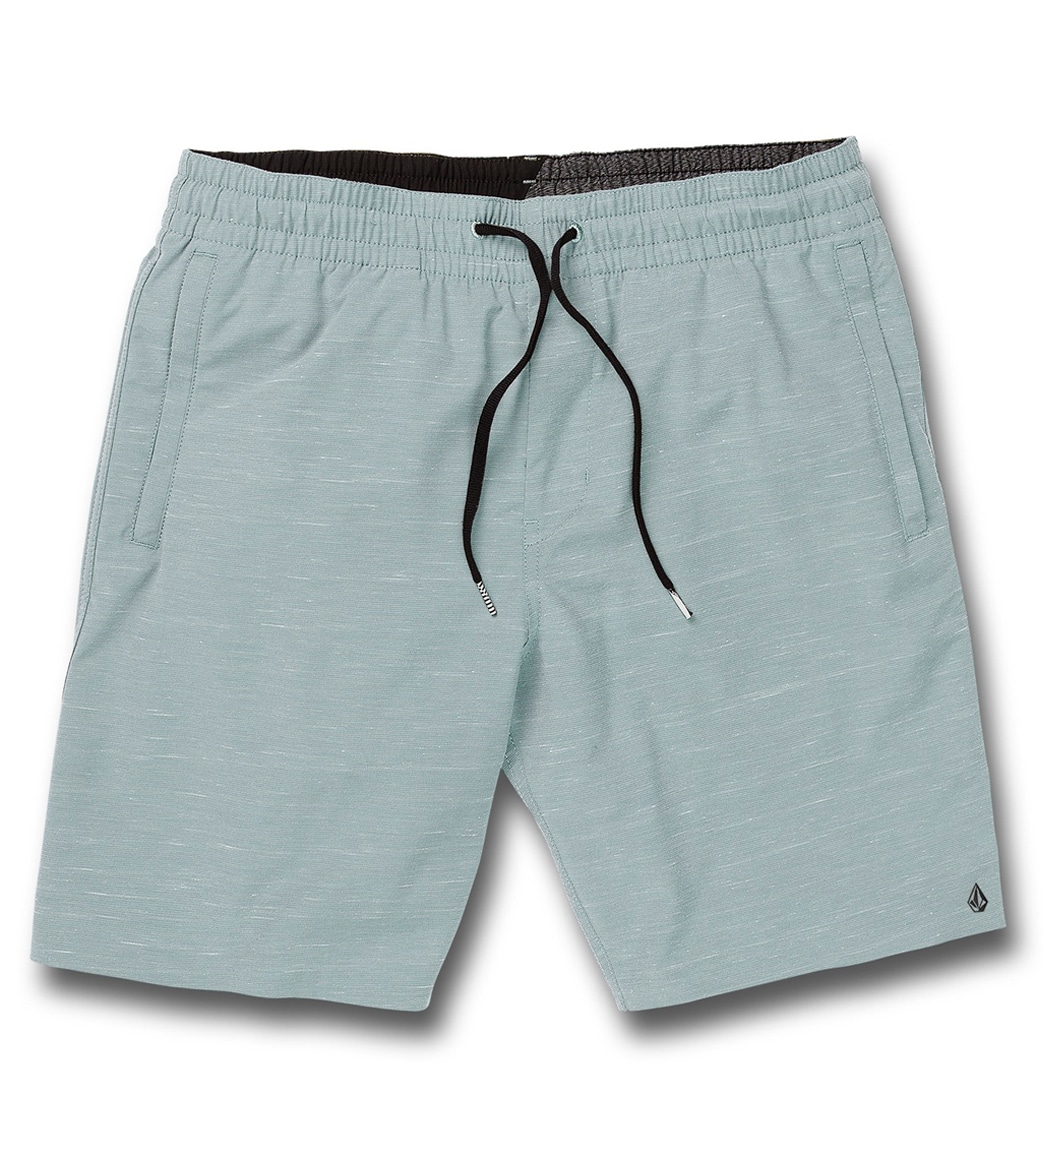 Volcom Men's Packasack Lite 19 Shorts - Stormy Sea Large Cotton/Polyester - Swimoutlet.com